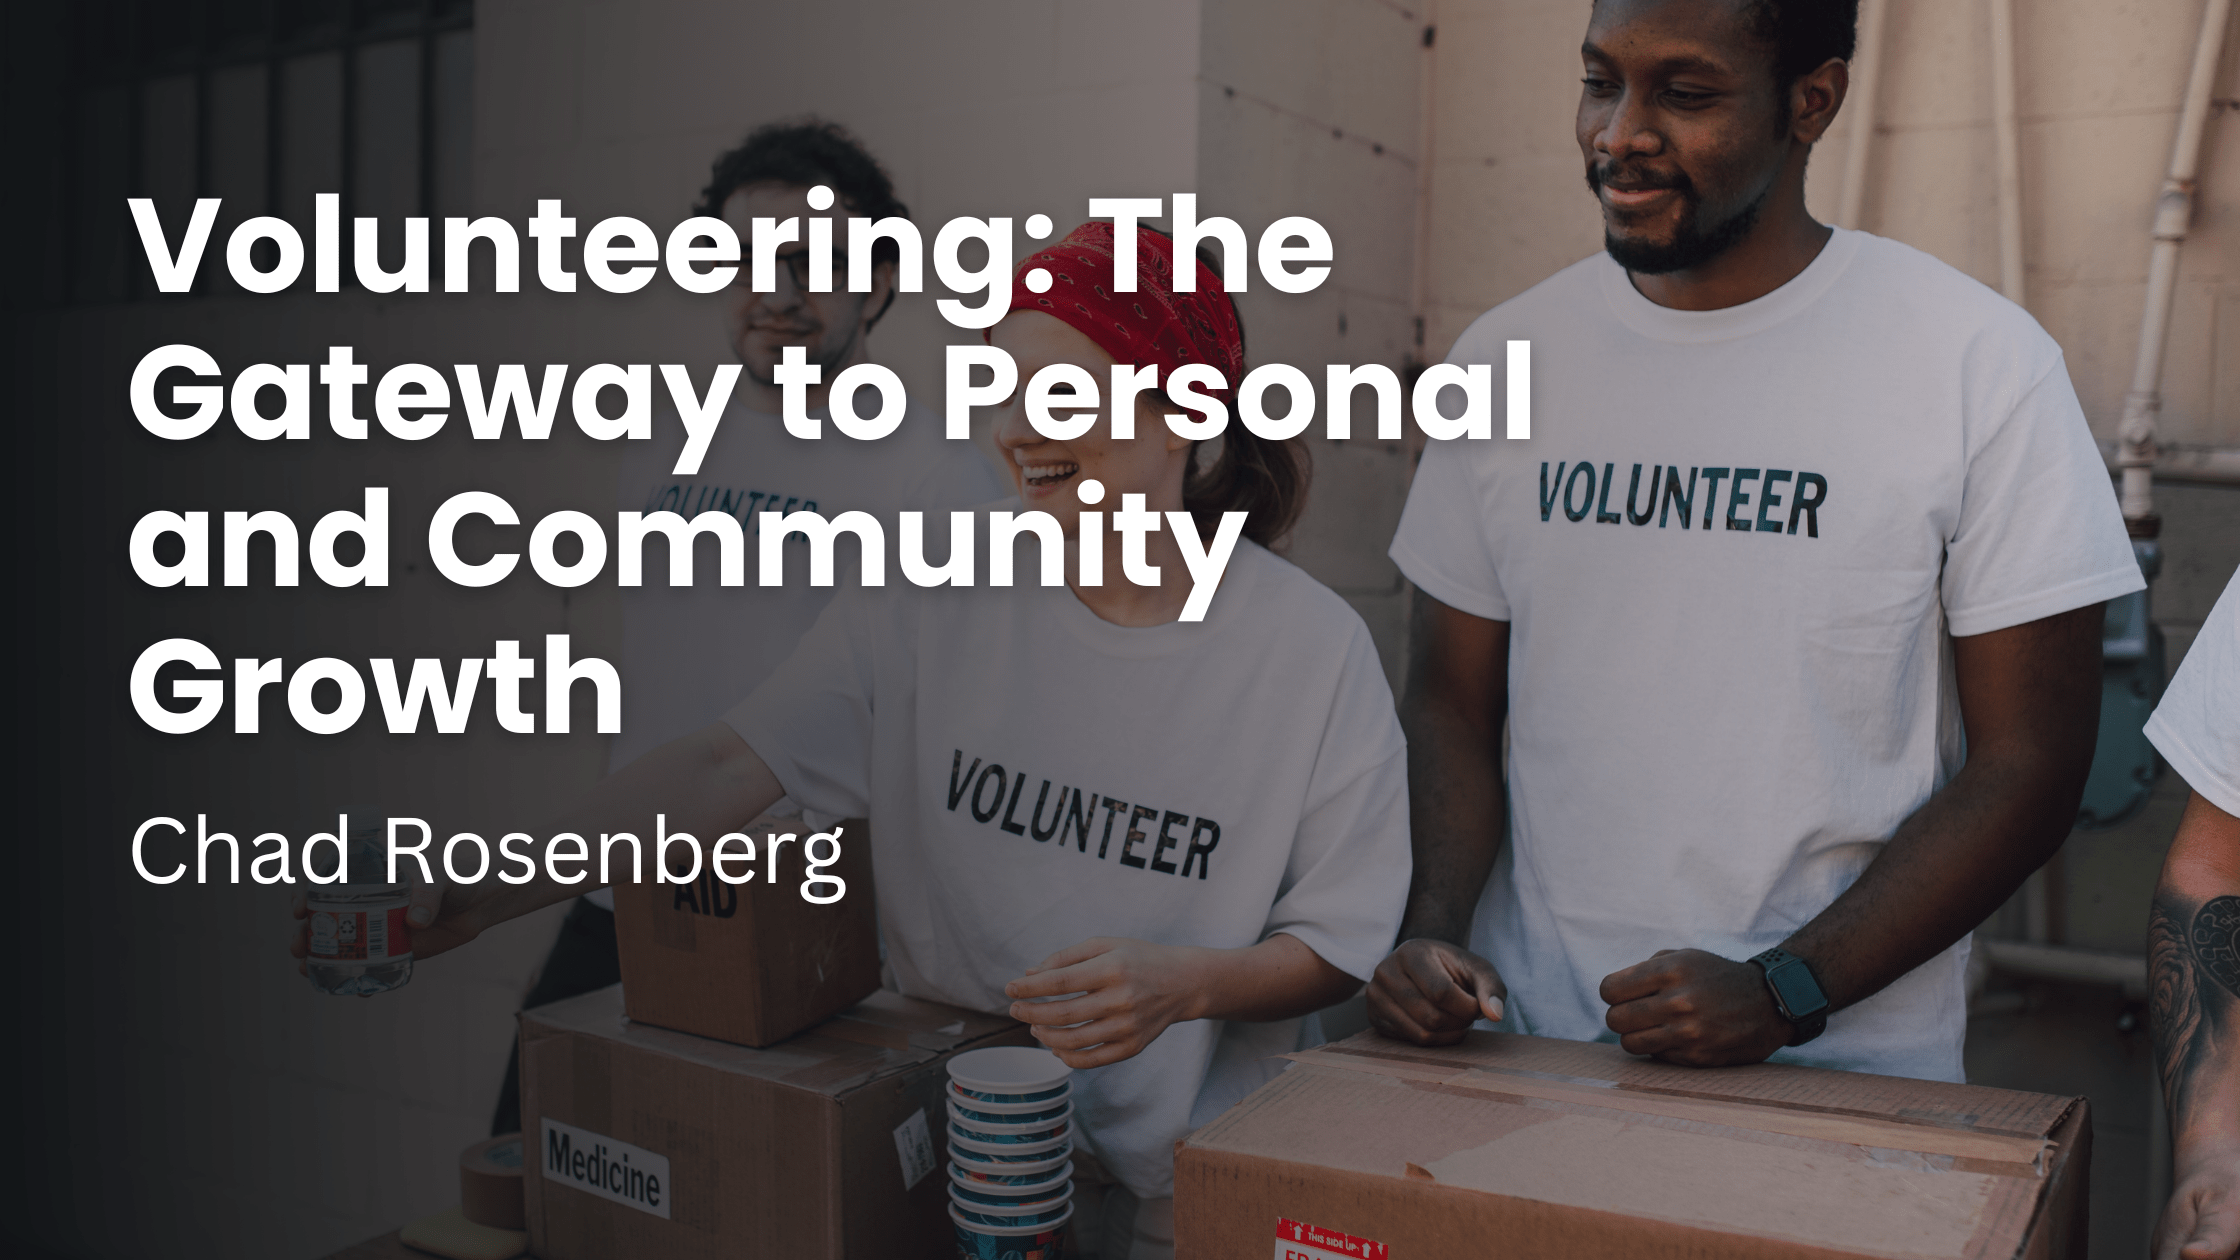 Volunteering: The Gateway to Personal and Community Growth